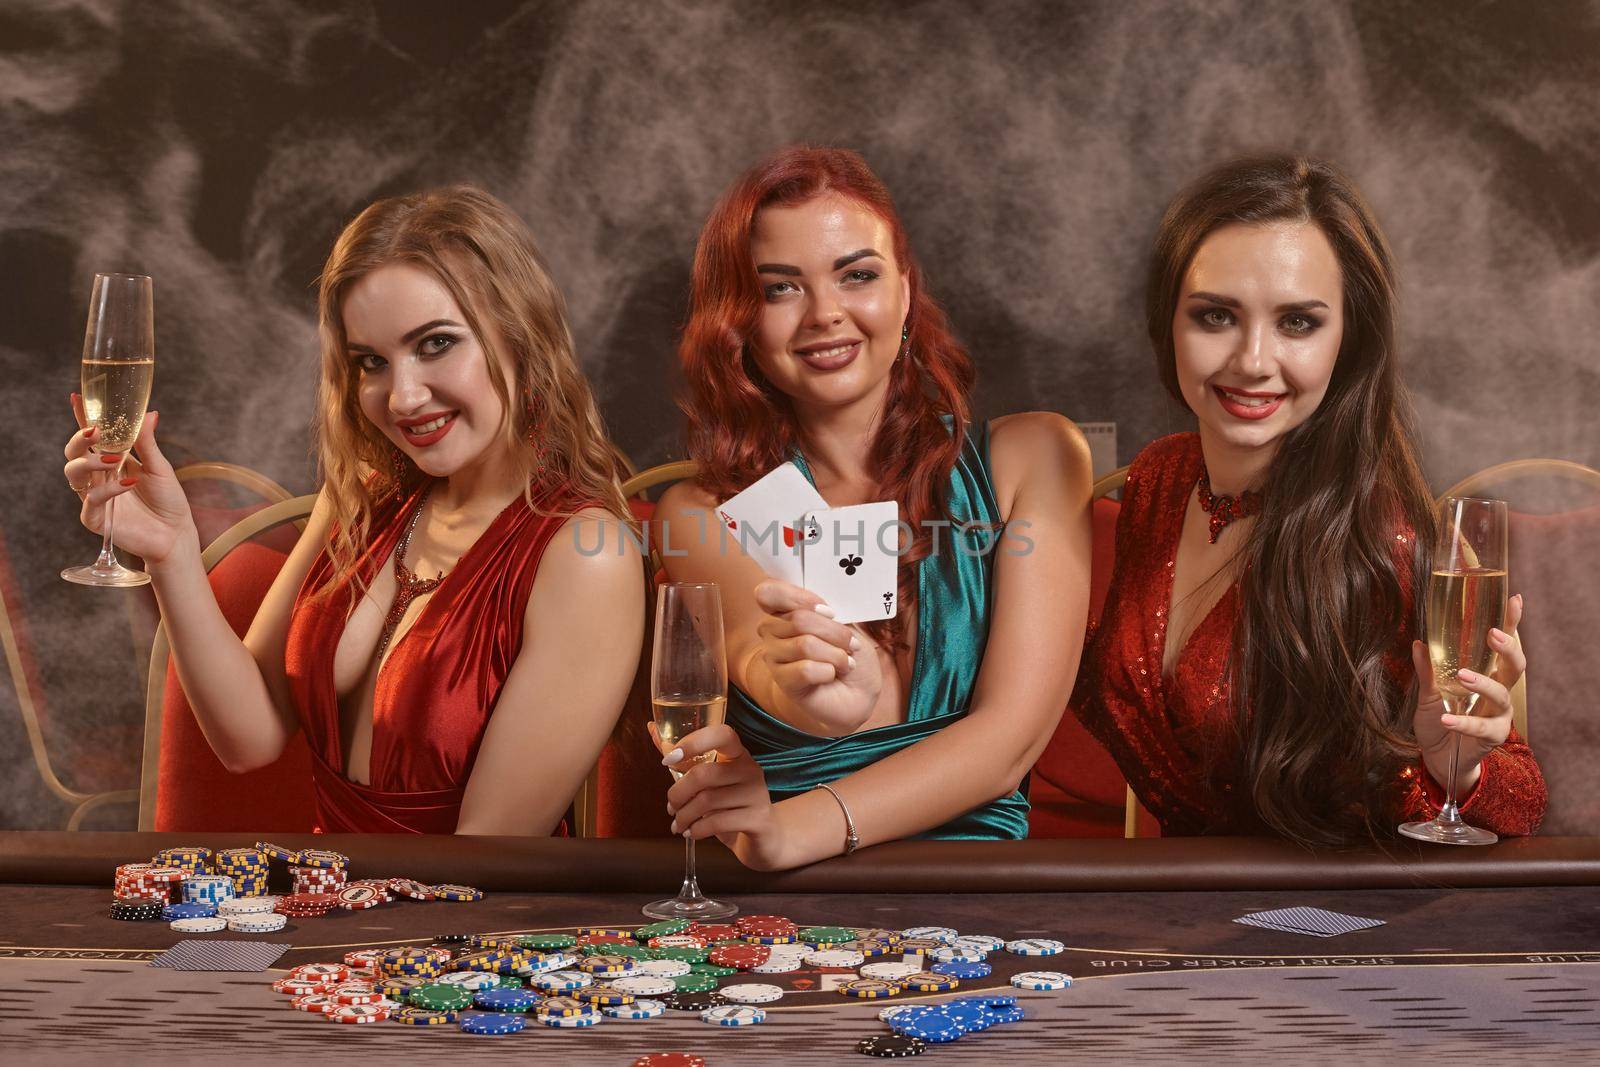 Cute maidens are playing poker at casino. They are celebrating their win, smiling, looking at the camera and posing at the table against a a dark smoke background. Cards, chips, money, alcohol, gambling, entertainment concept.